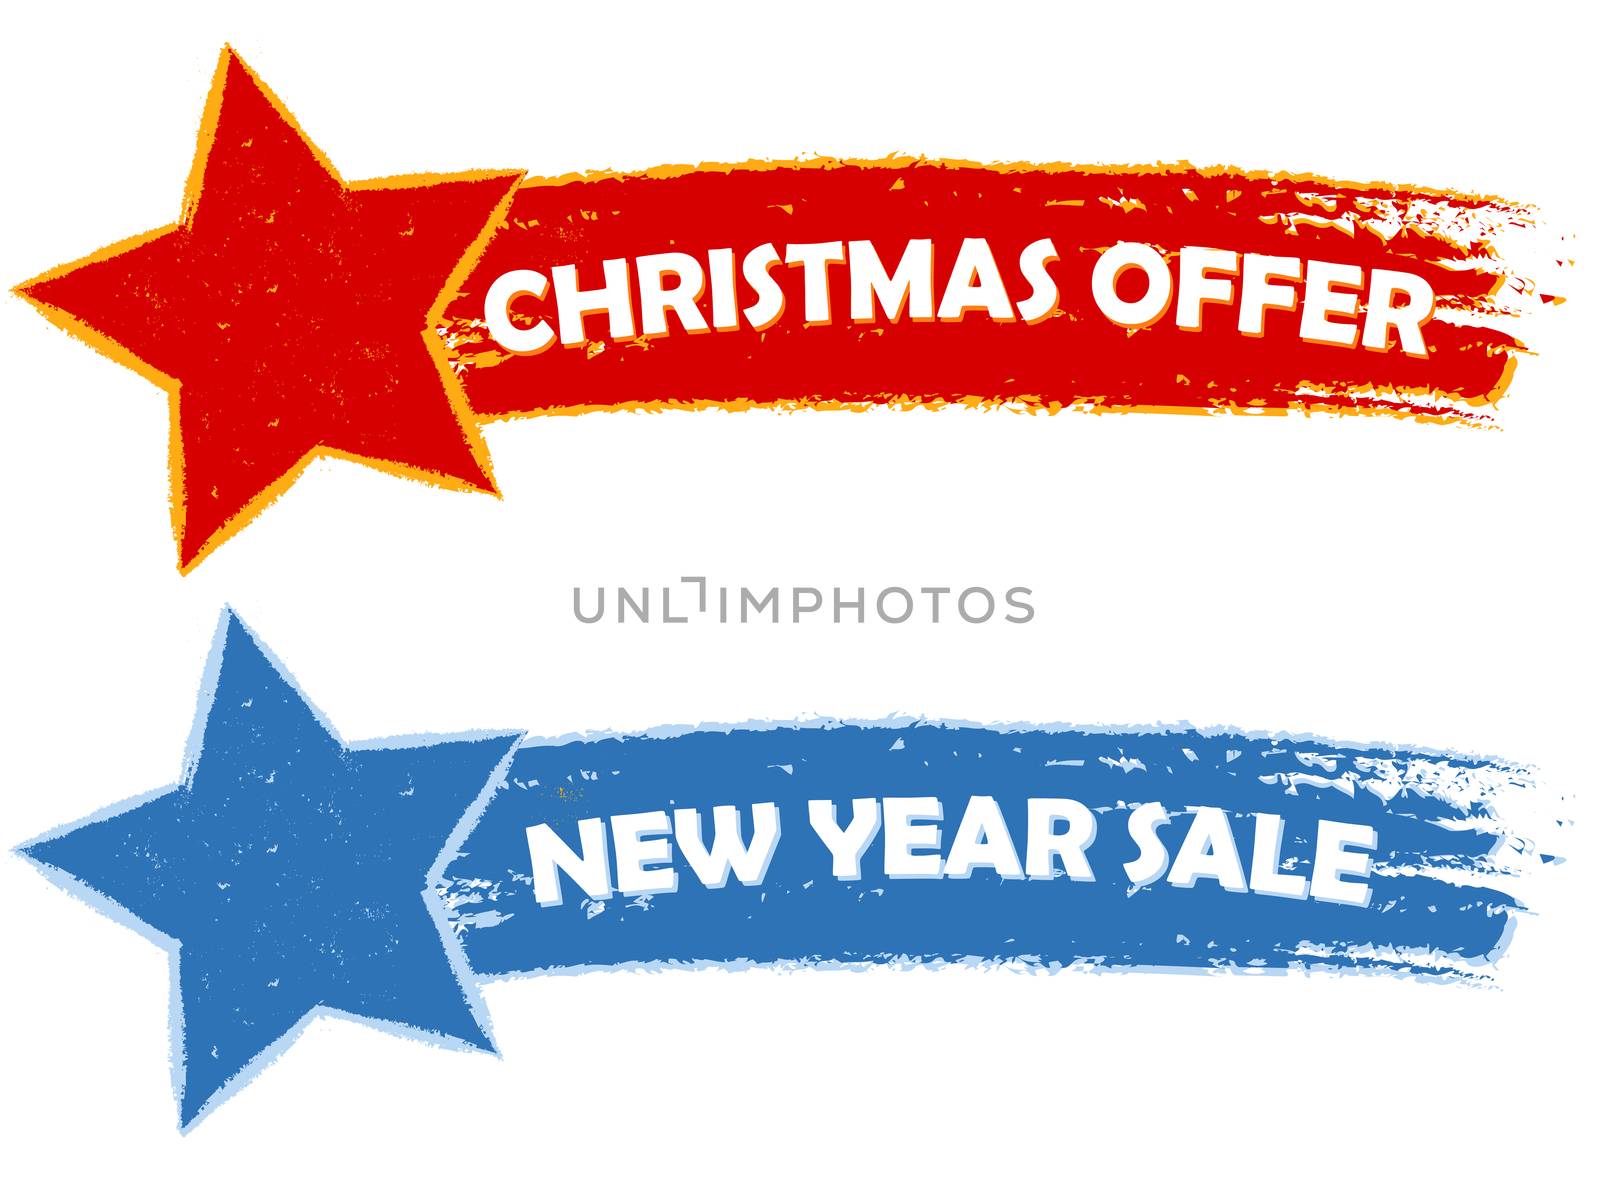 Christmas offer, new year sale - two drawn banners by marinini